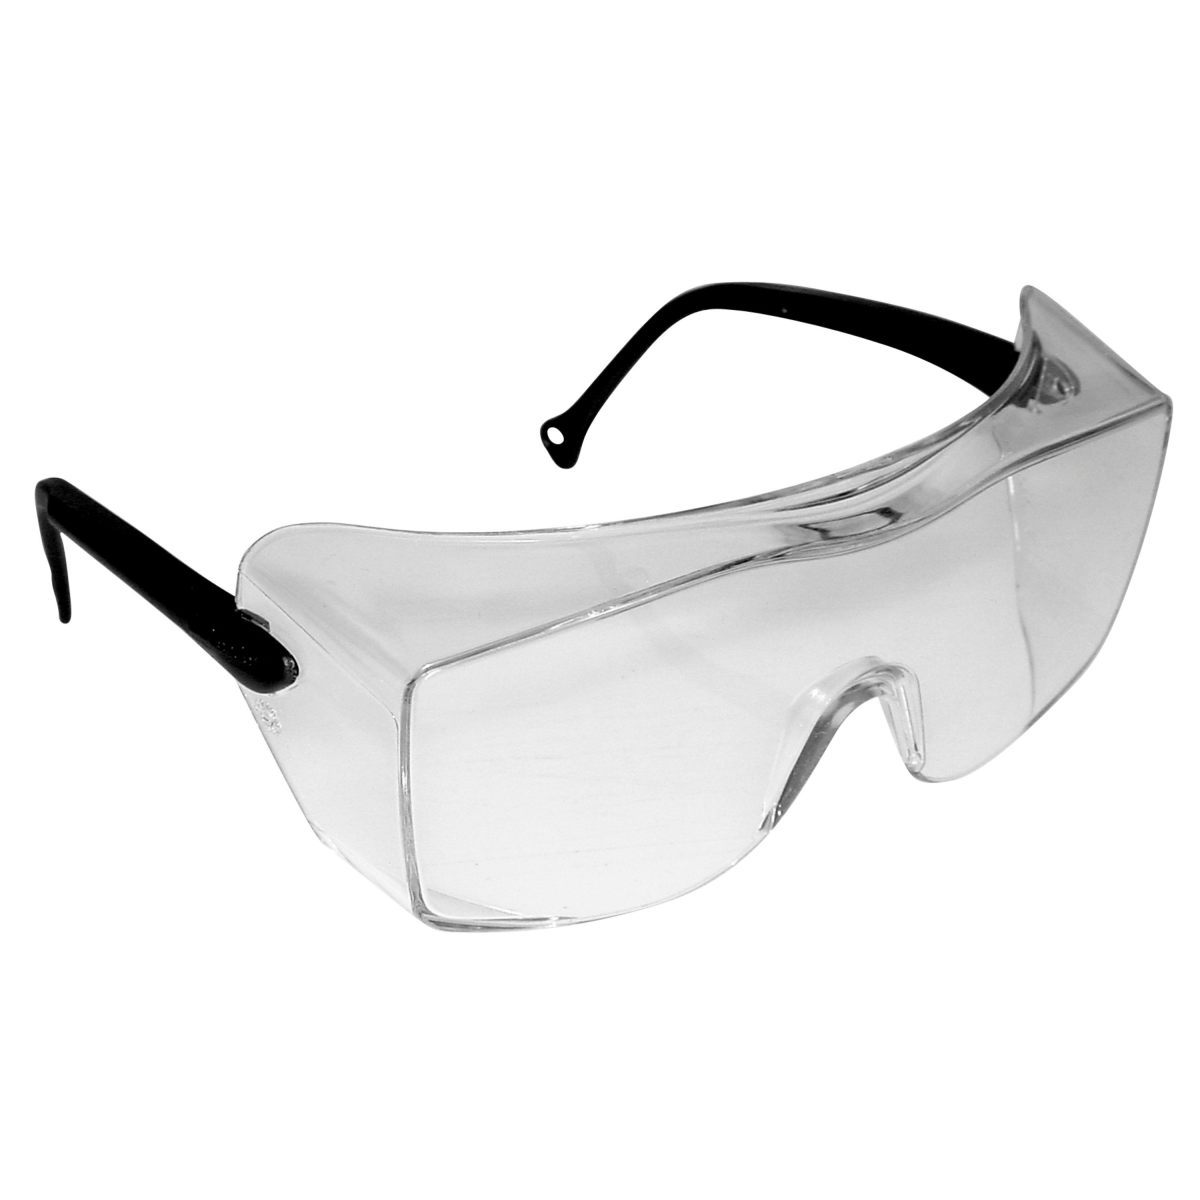 3M™ OX™ Protective Eyewear 2000, 12163-00000-20 Clear Anti-Fog Lens, Black Temple (Availability restrictions apply.)